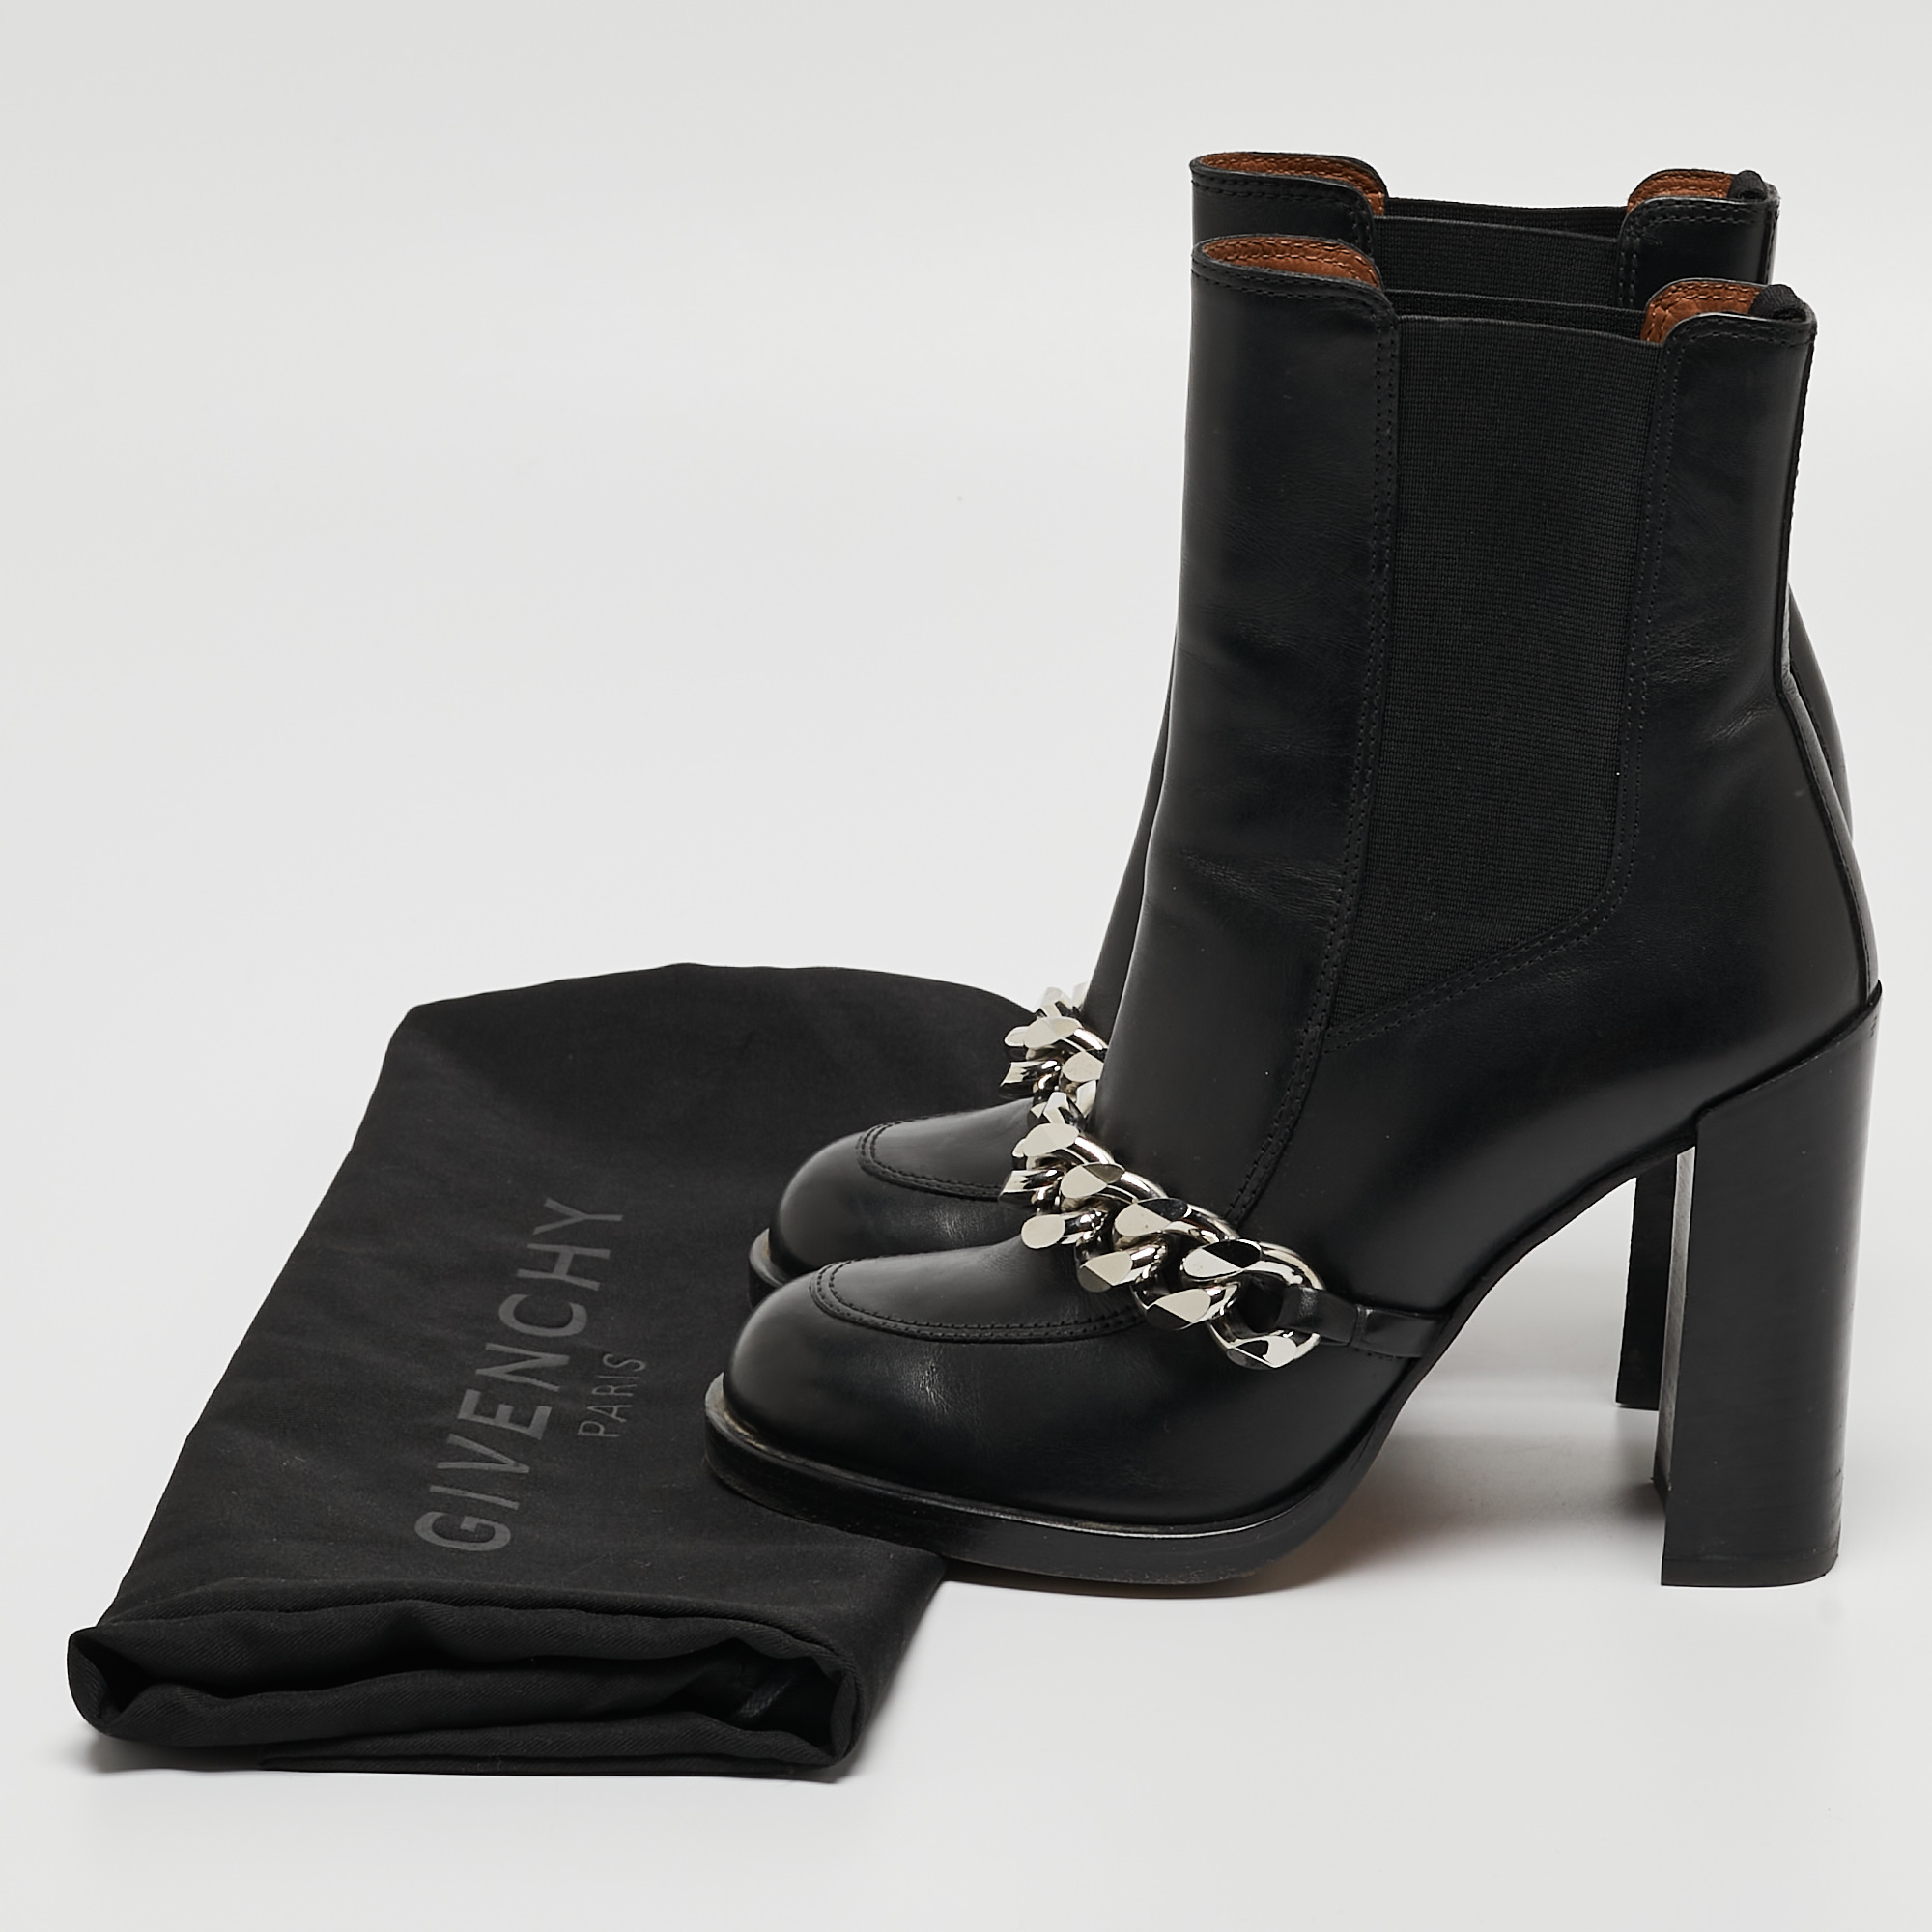 Givenchy Black Leather Ankle Boots Size 35